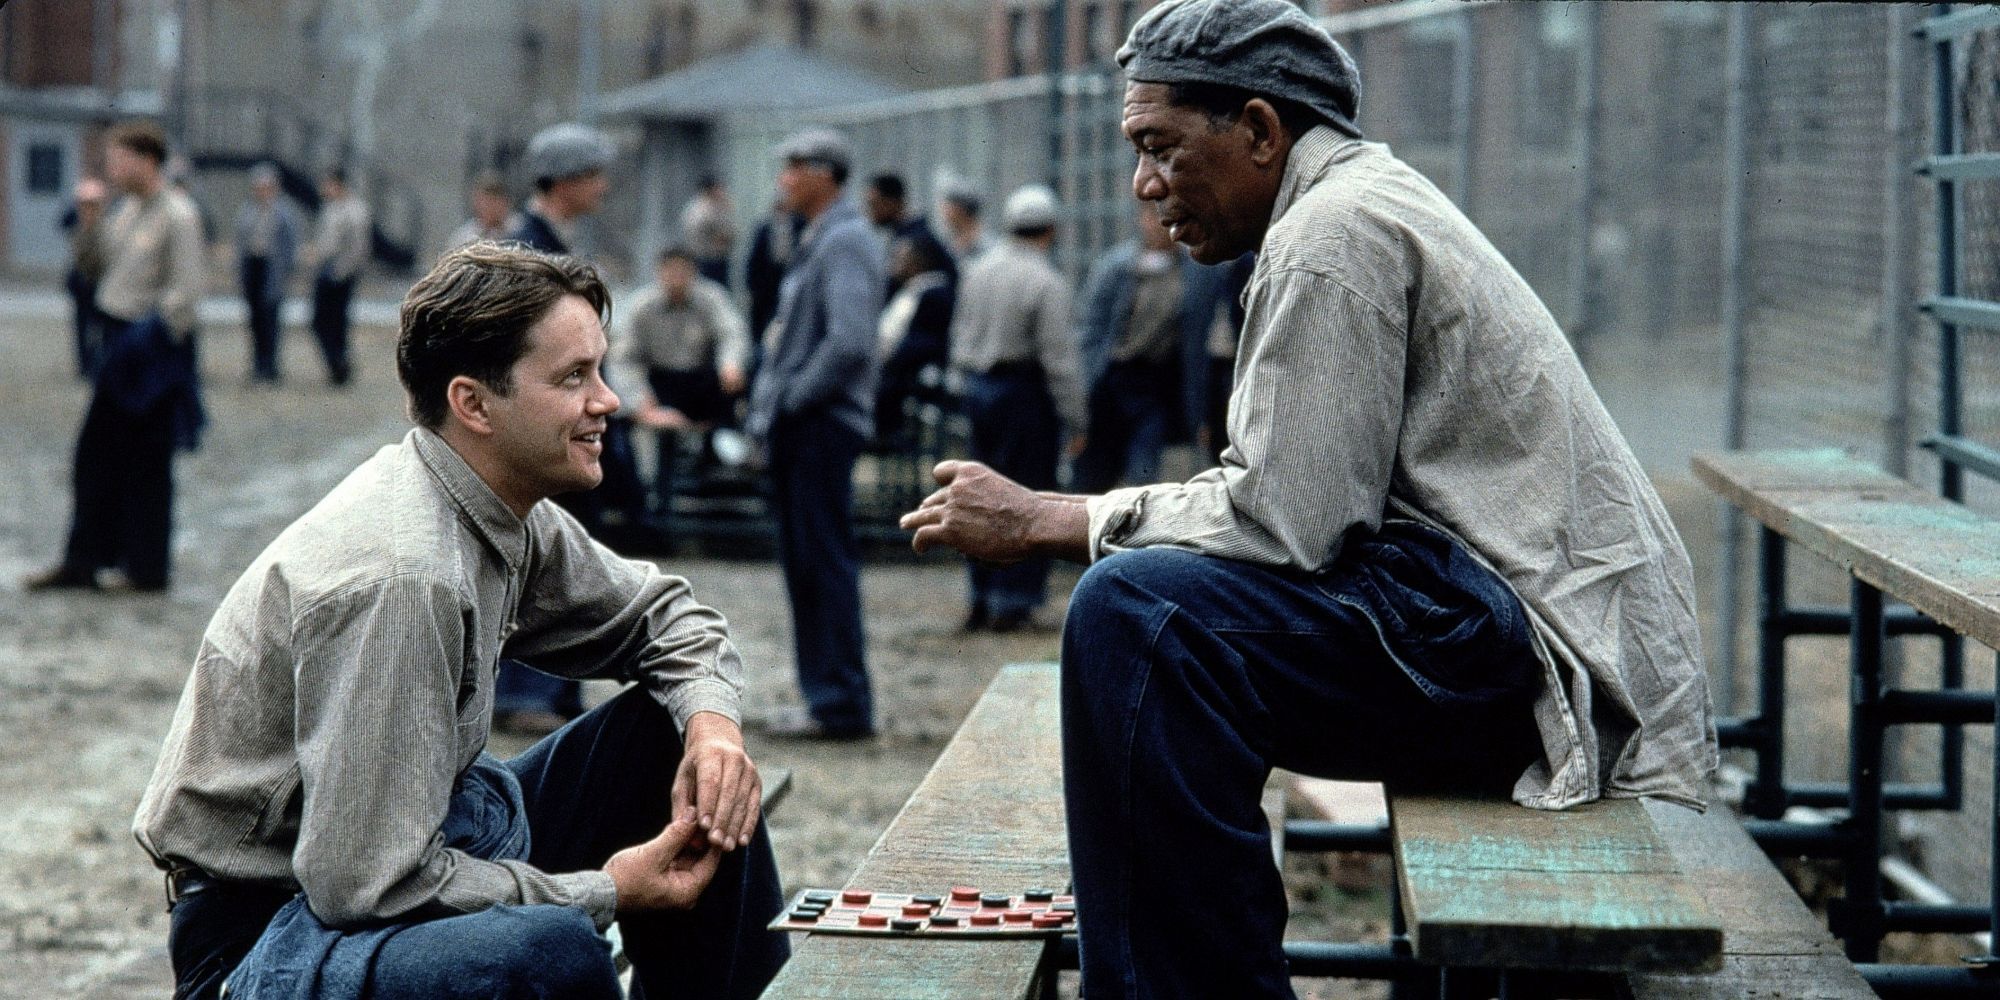 The two main characters from The Shawshank Redemption sitting and talking